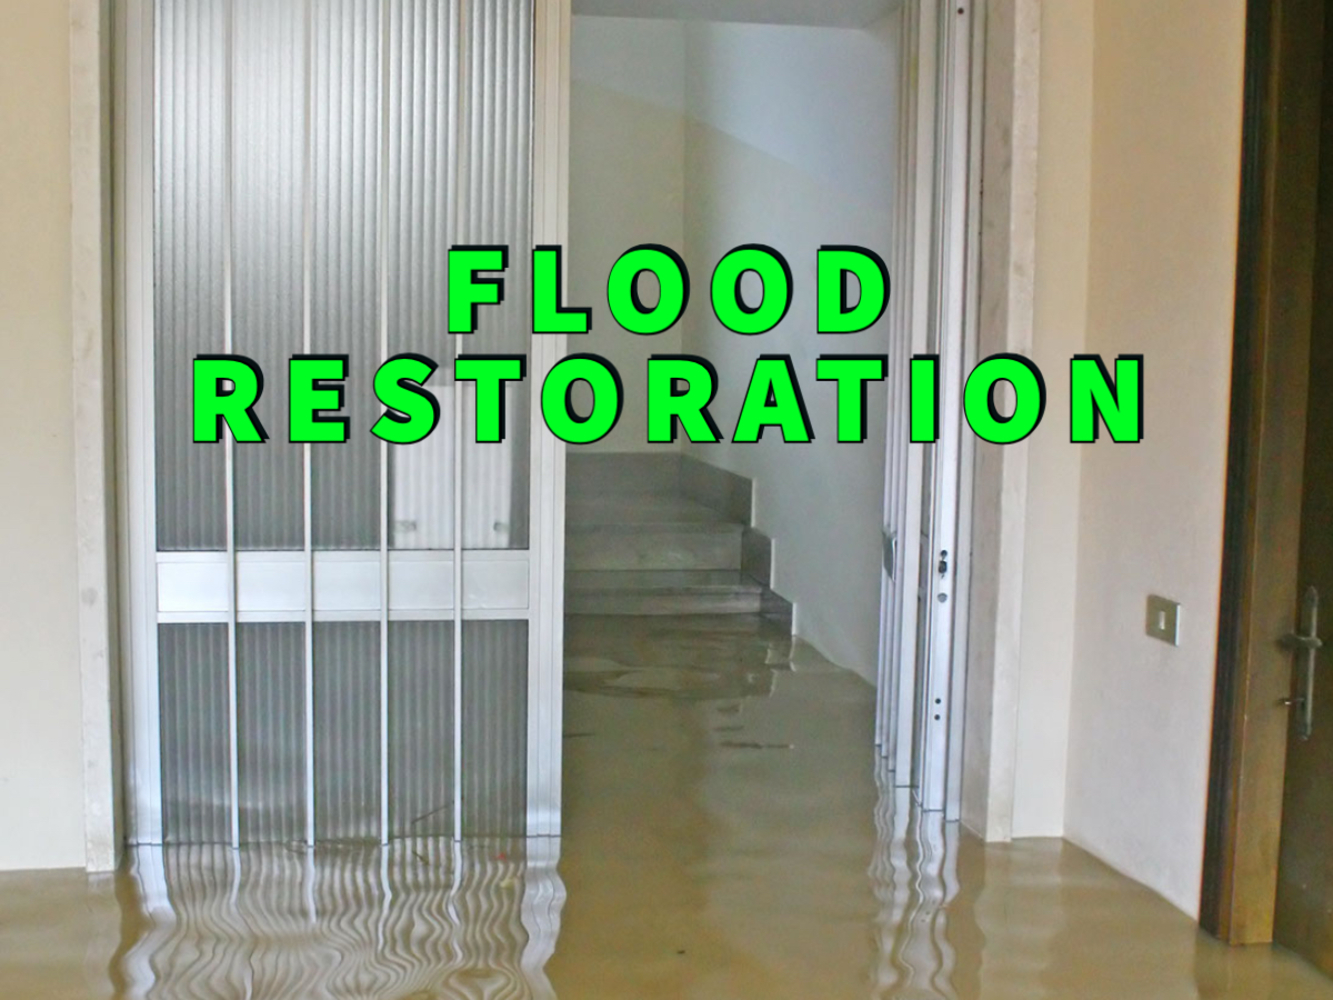 Flood restoration written in green over basement with standing water